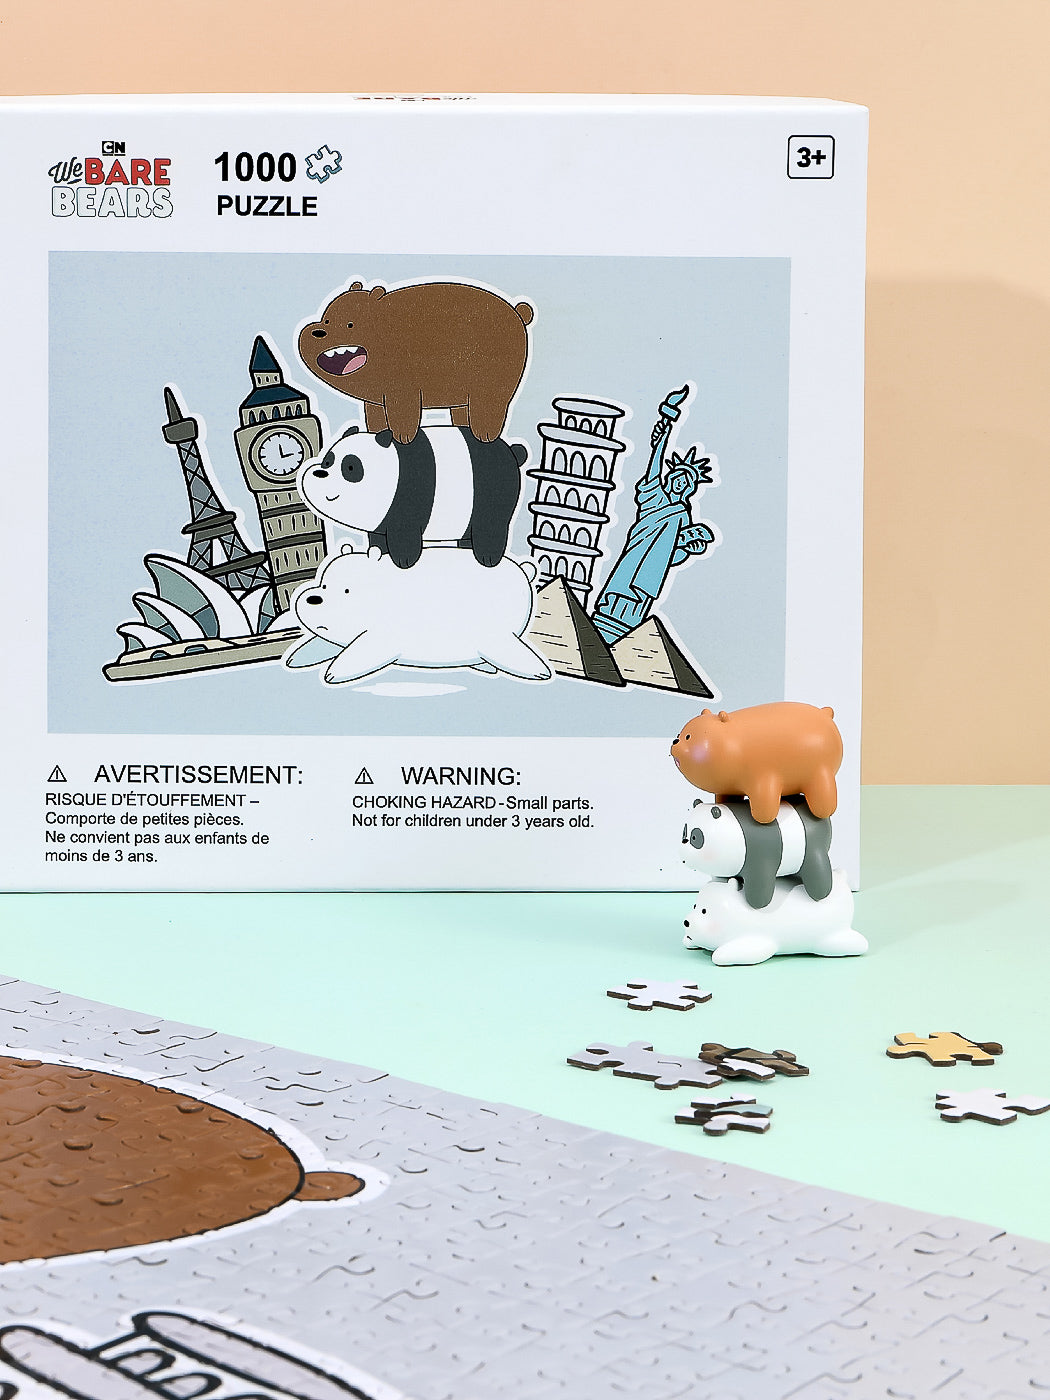 MINISO WE BARE BEARS 1000 PIECES PUZZLE ( PLACES OF INTEREST ) 2010033712106 DIY PUZZLE